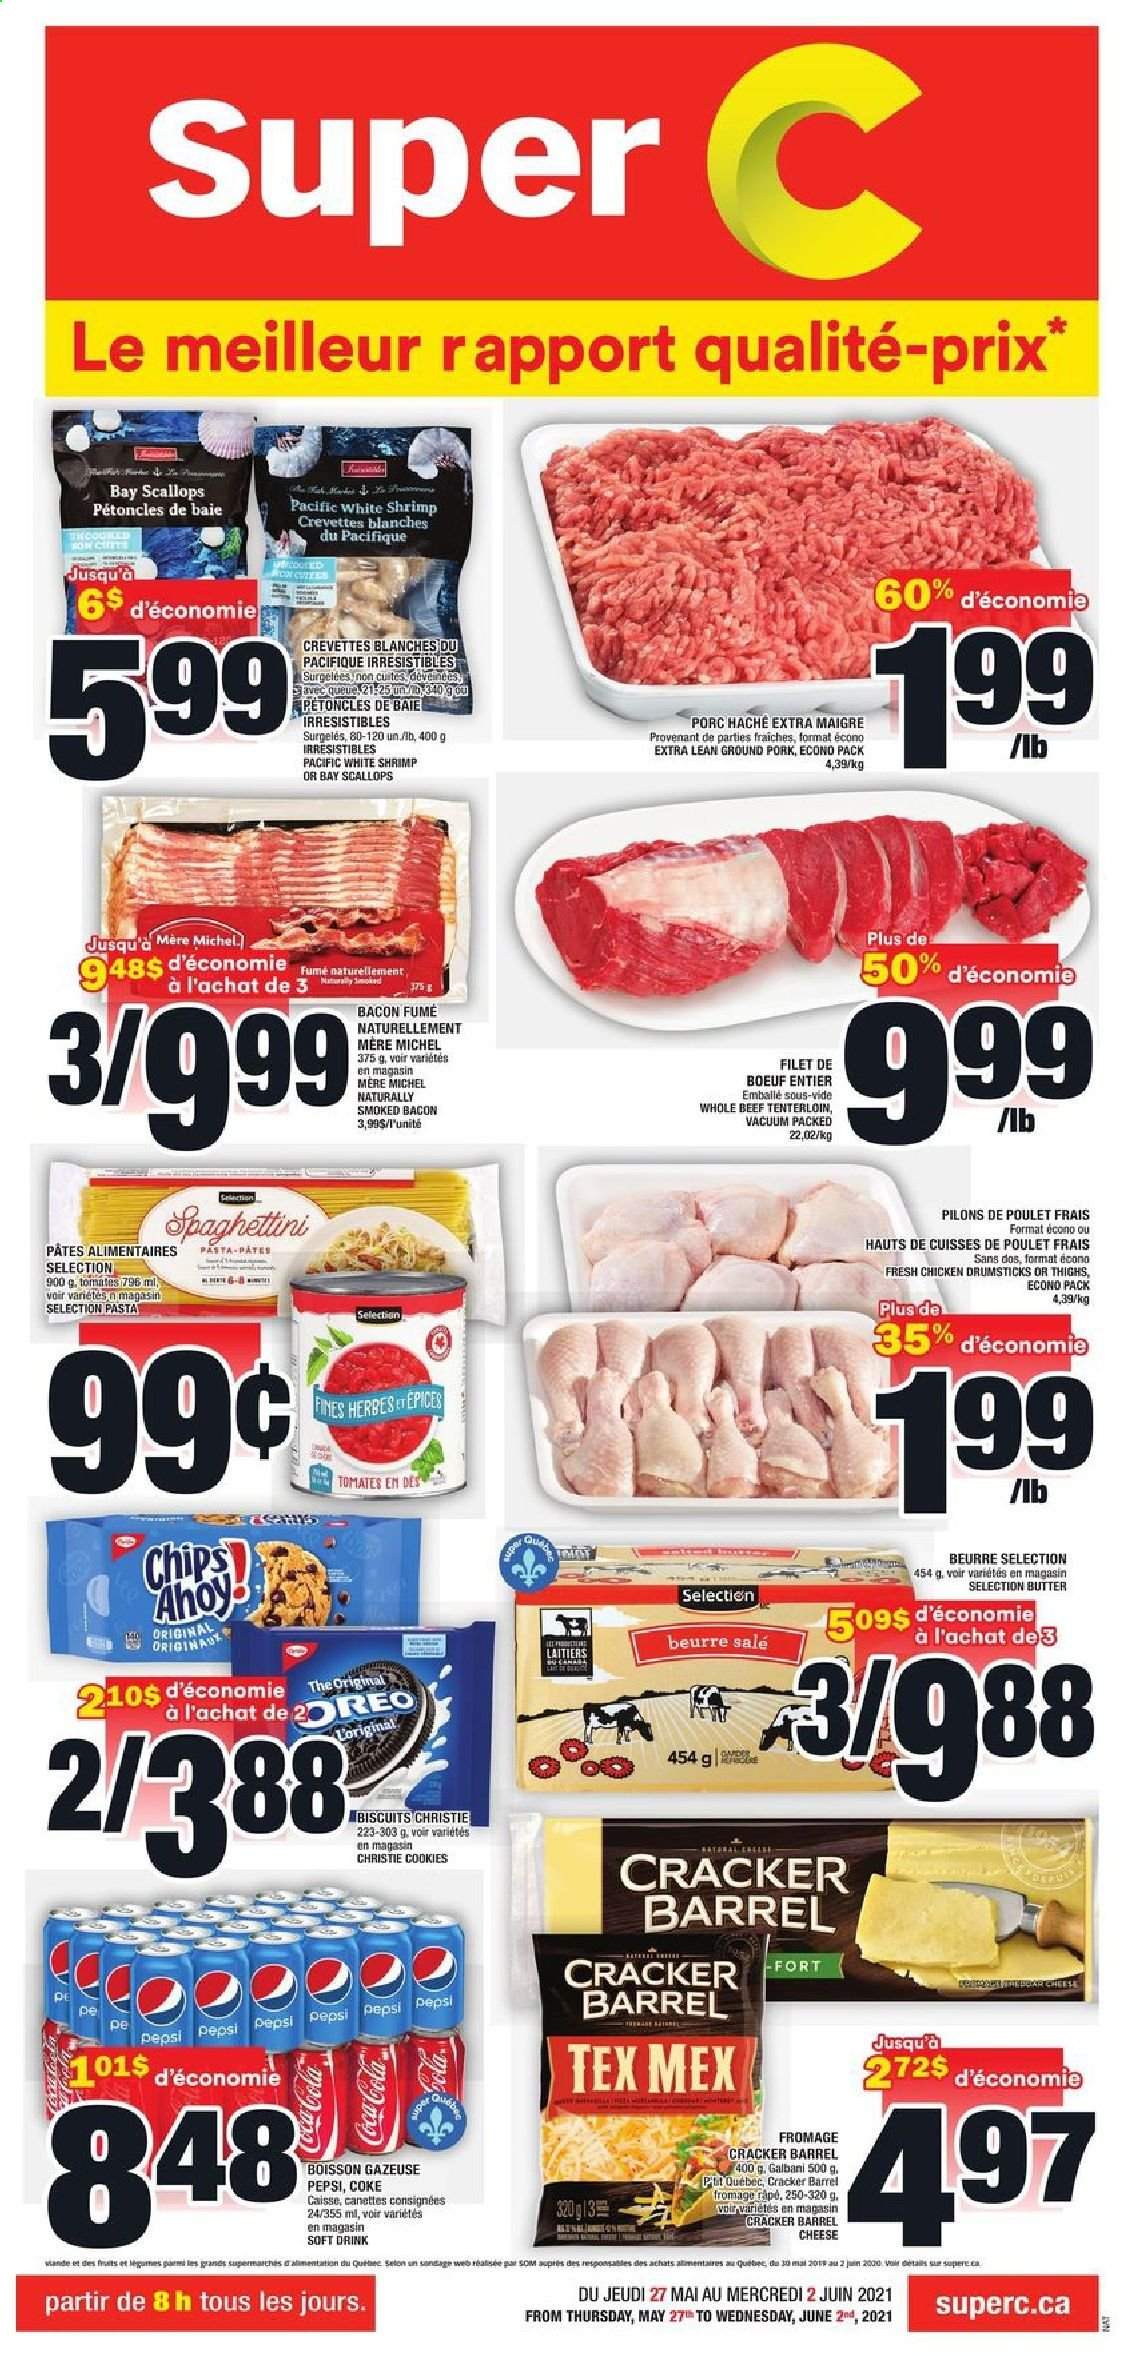 thumbnail - Super C Flyer - May 27, 2021 - June 02, 2021 - Sales products - scallops, shrimps, pasta, bacon, cheese, Galbani, Oreo, butter, cookies, crackers, biscuit, Coca-Cola, Pepsi, soft drink, chicken drumsticks, chicken, ground pork. Page 1.